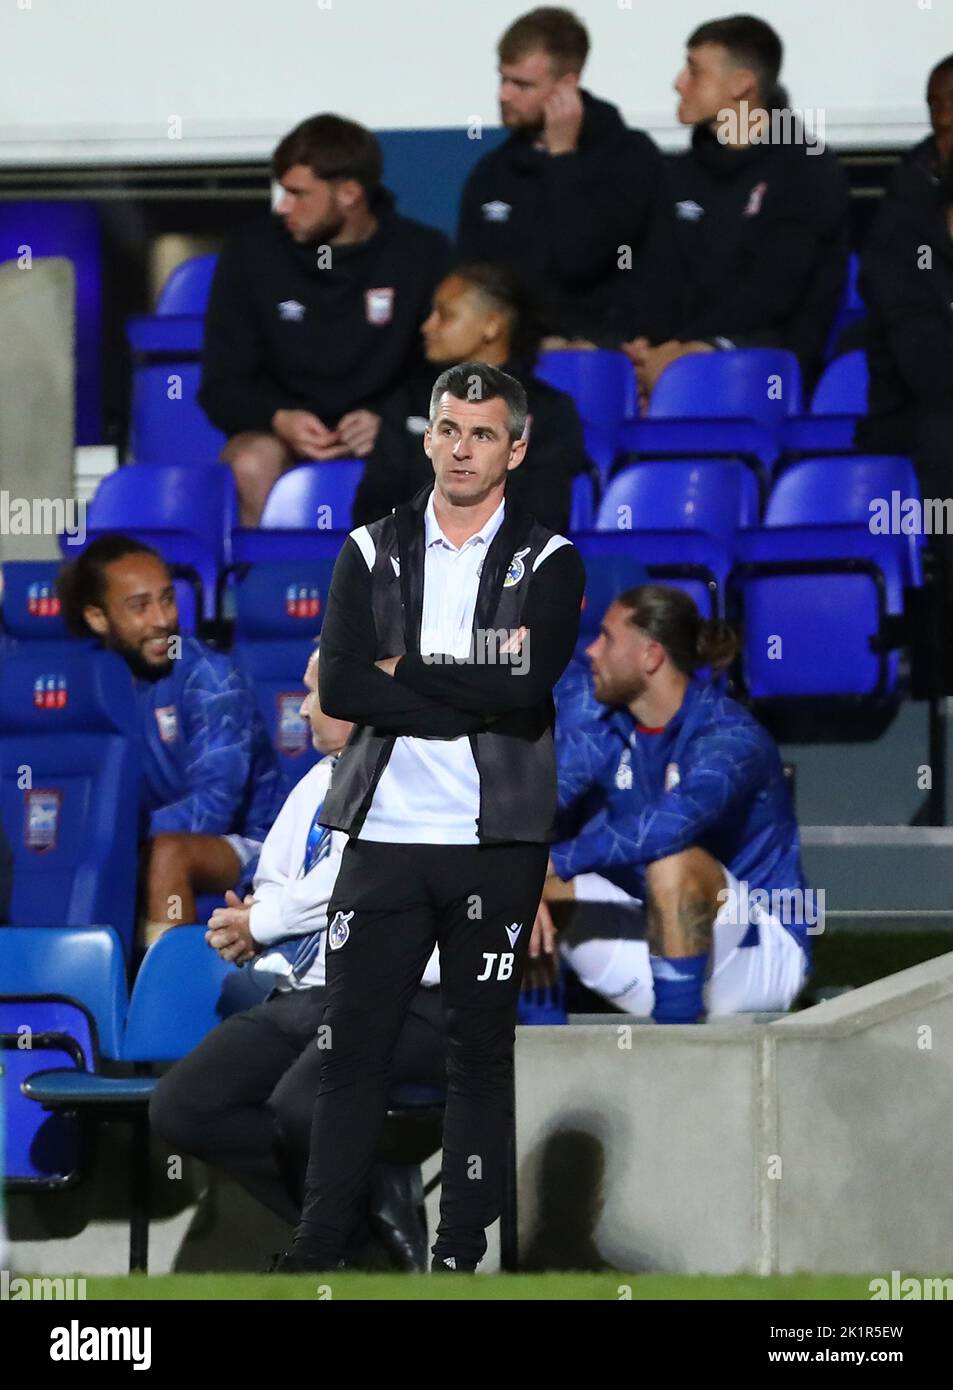 Manager of Bristol Rovers, Joey Barton - Ipswich Town v Bristol Rovers, Sky Bet League One, Portman Road, Ipswich, UK - 13th September 2022  Editorial Use Only - DataCo restrictions apply Stock Photo